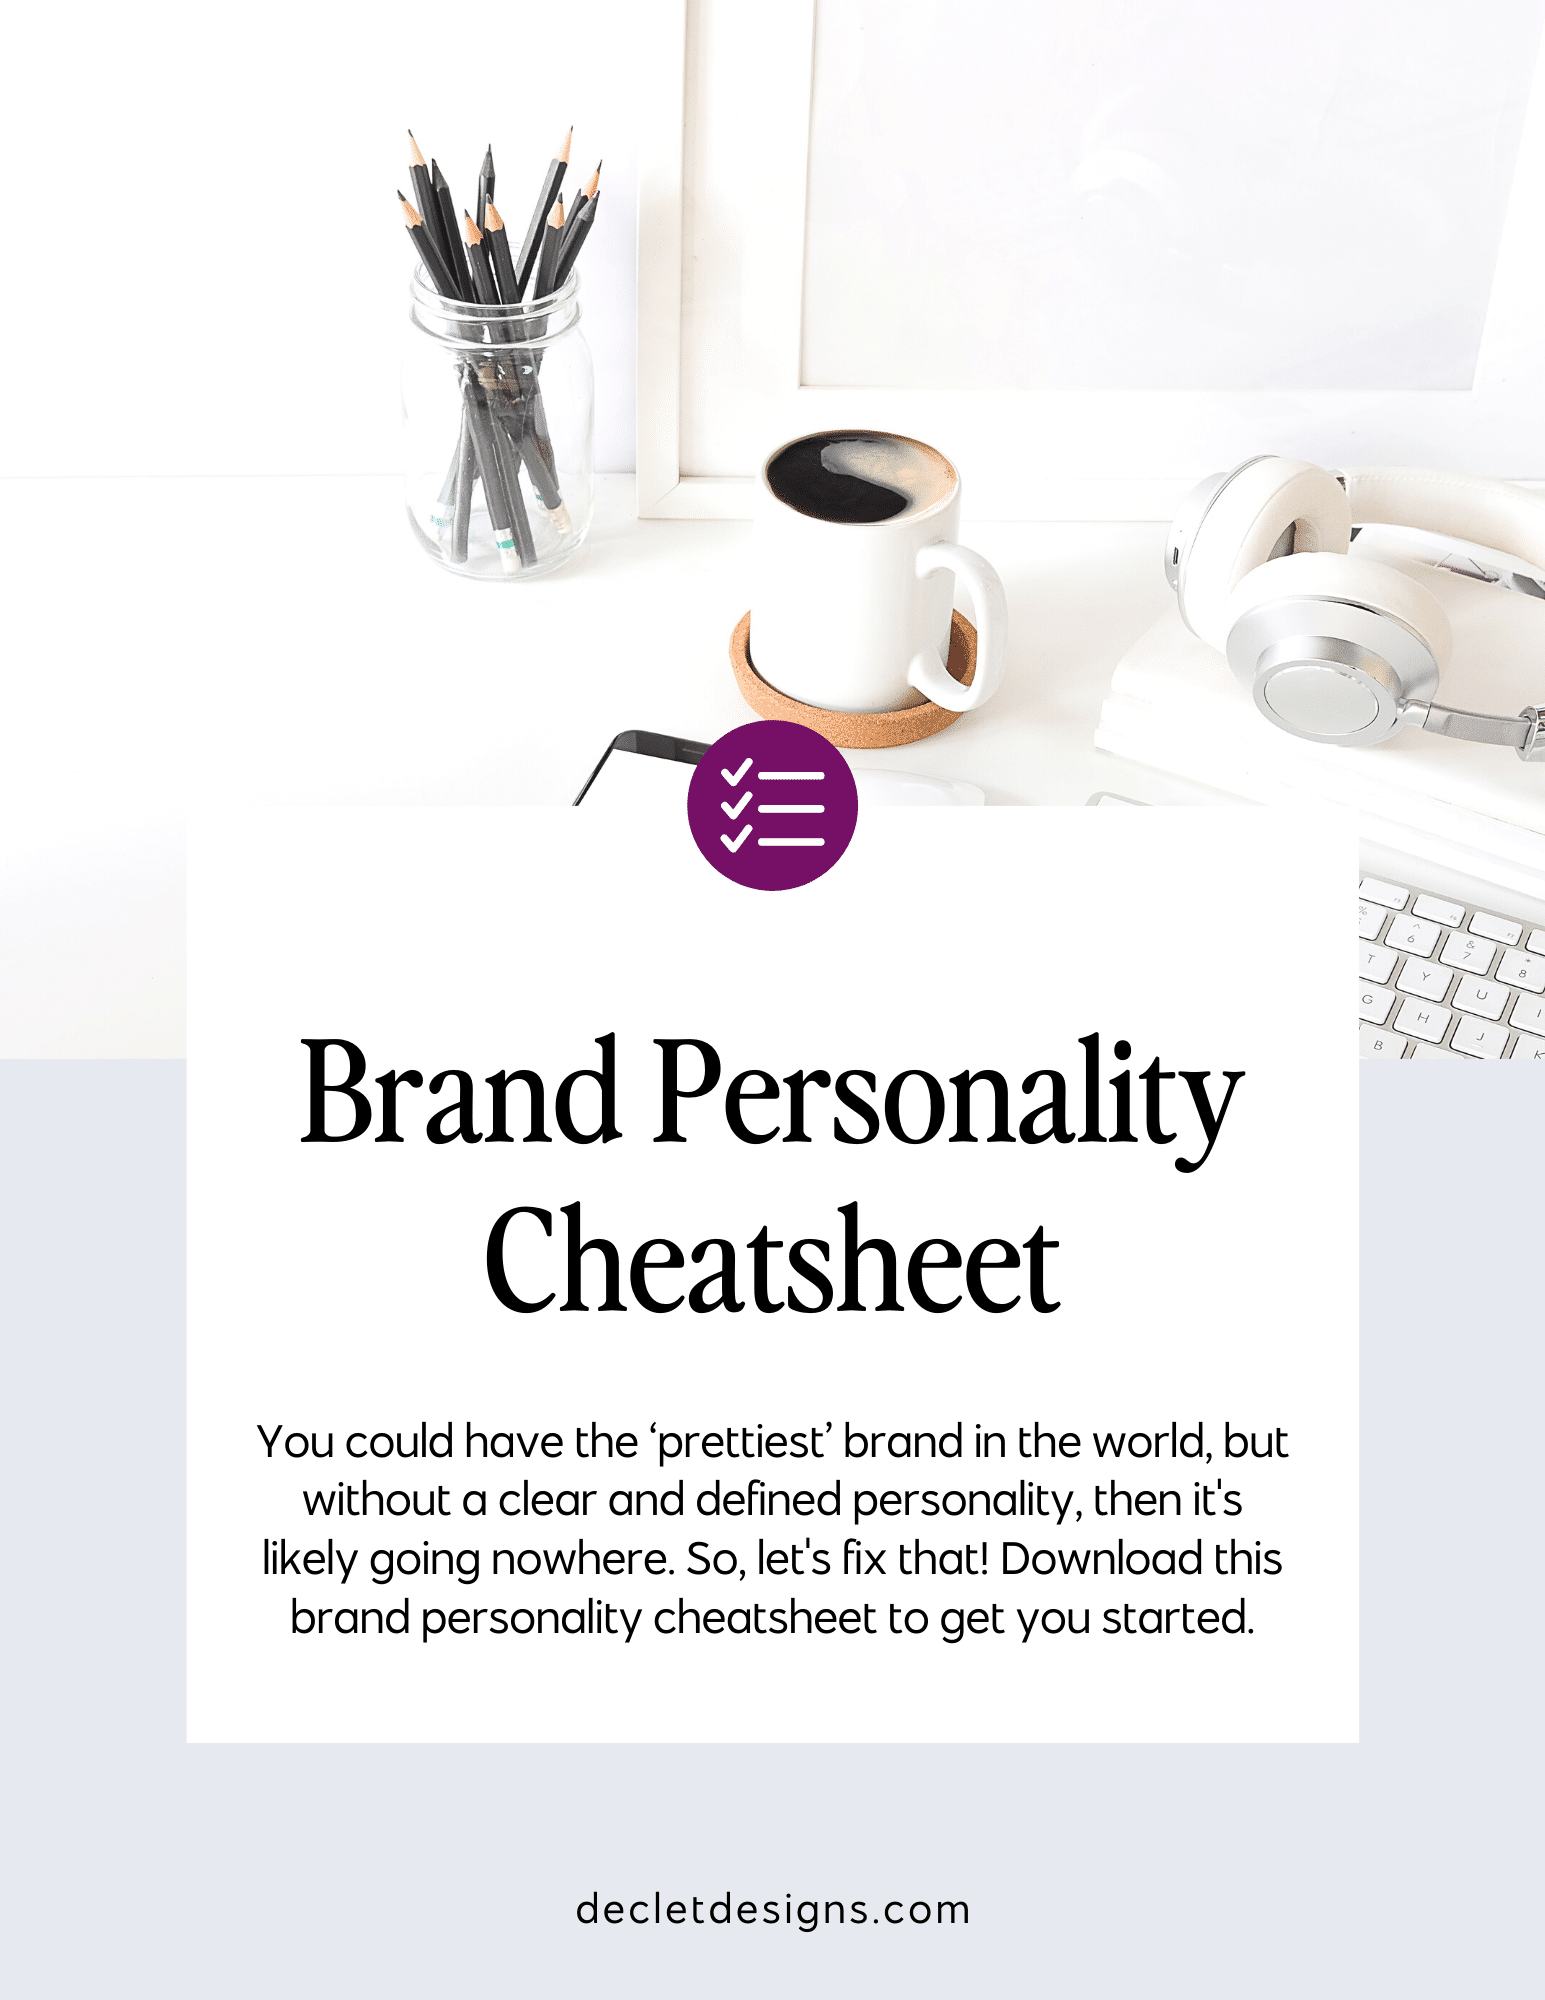 Brand personality cheatsheet for private practice dietitian